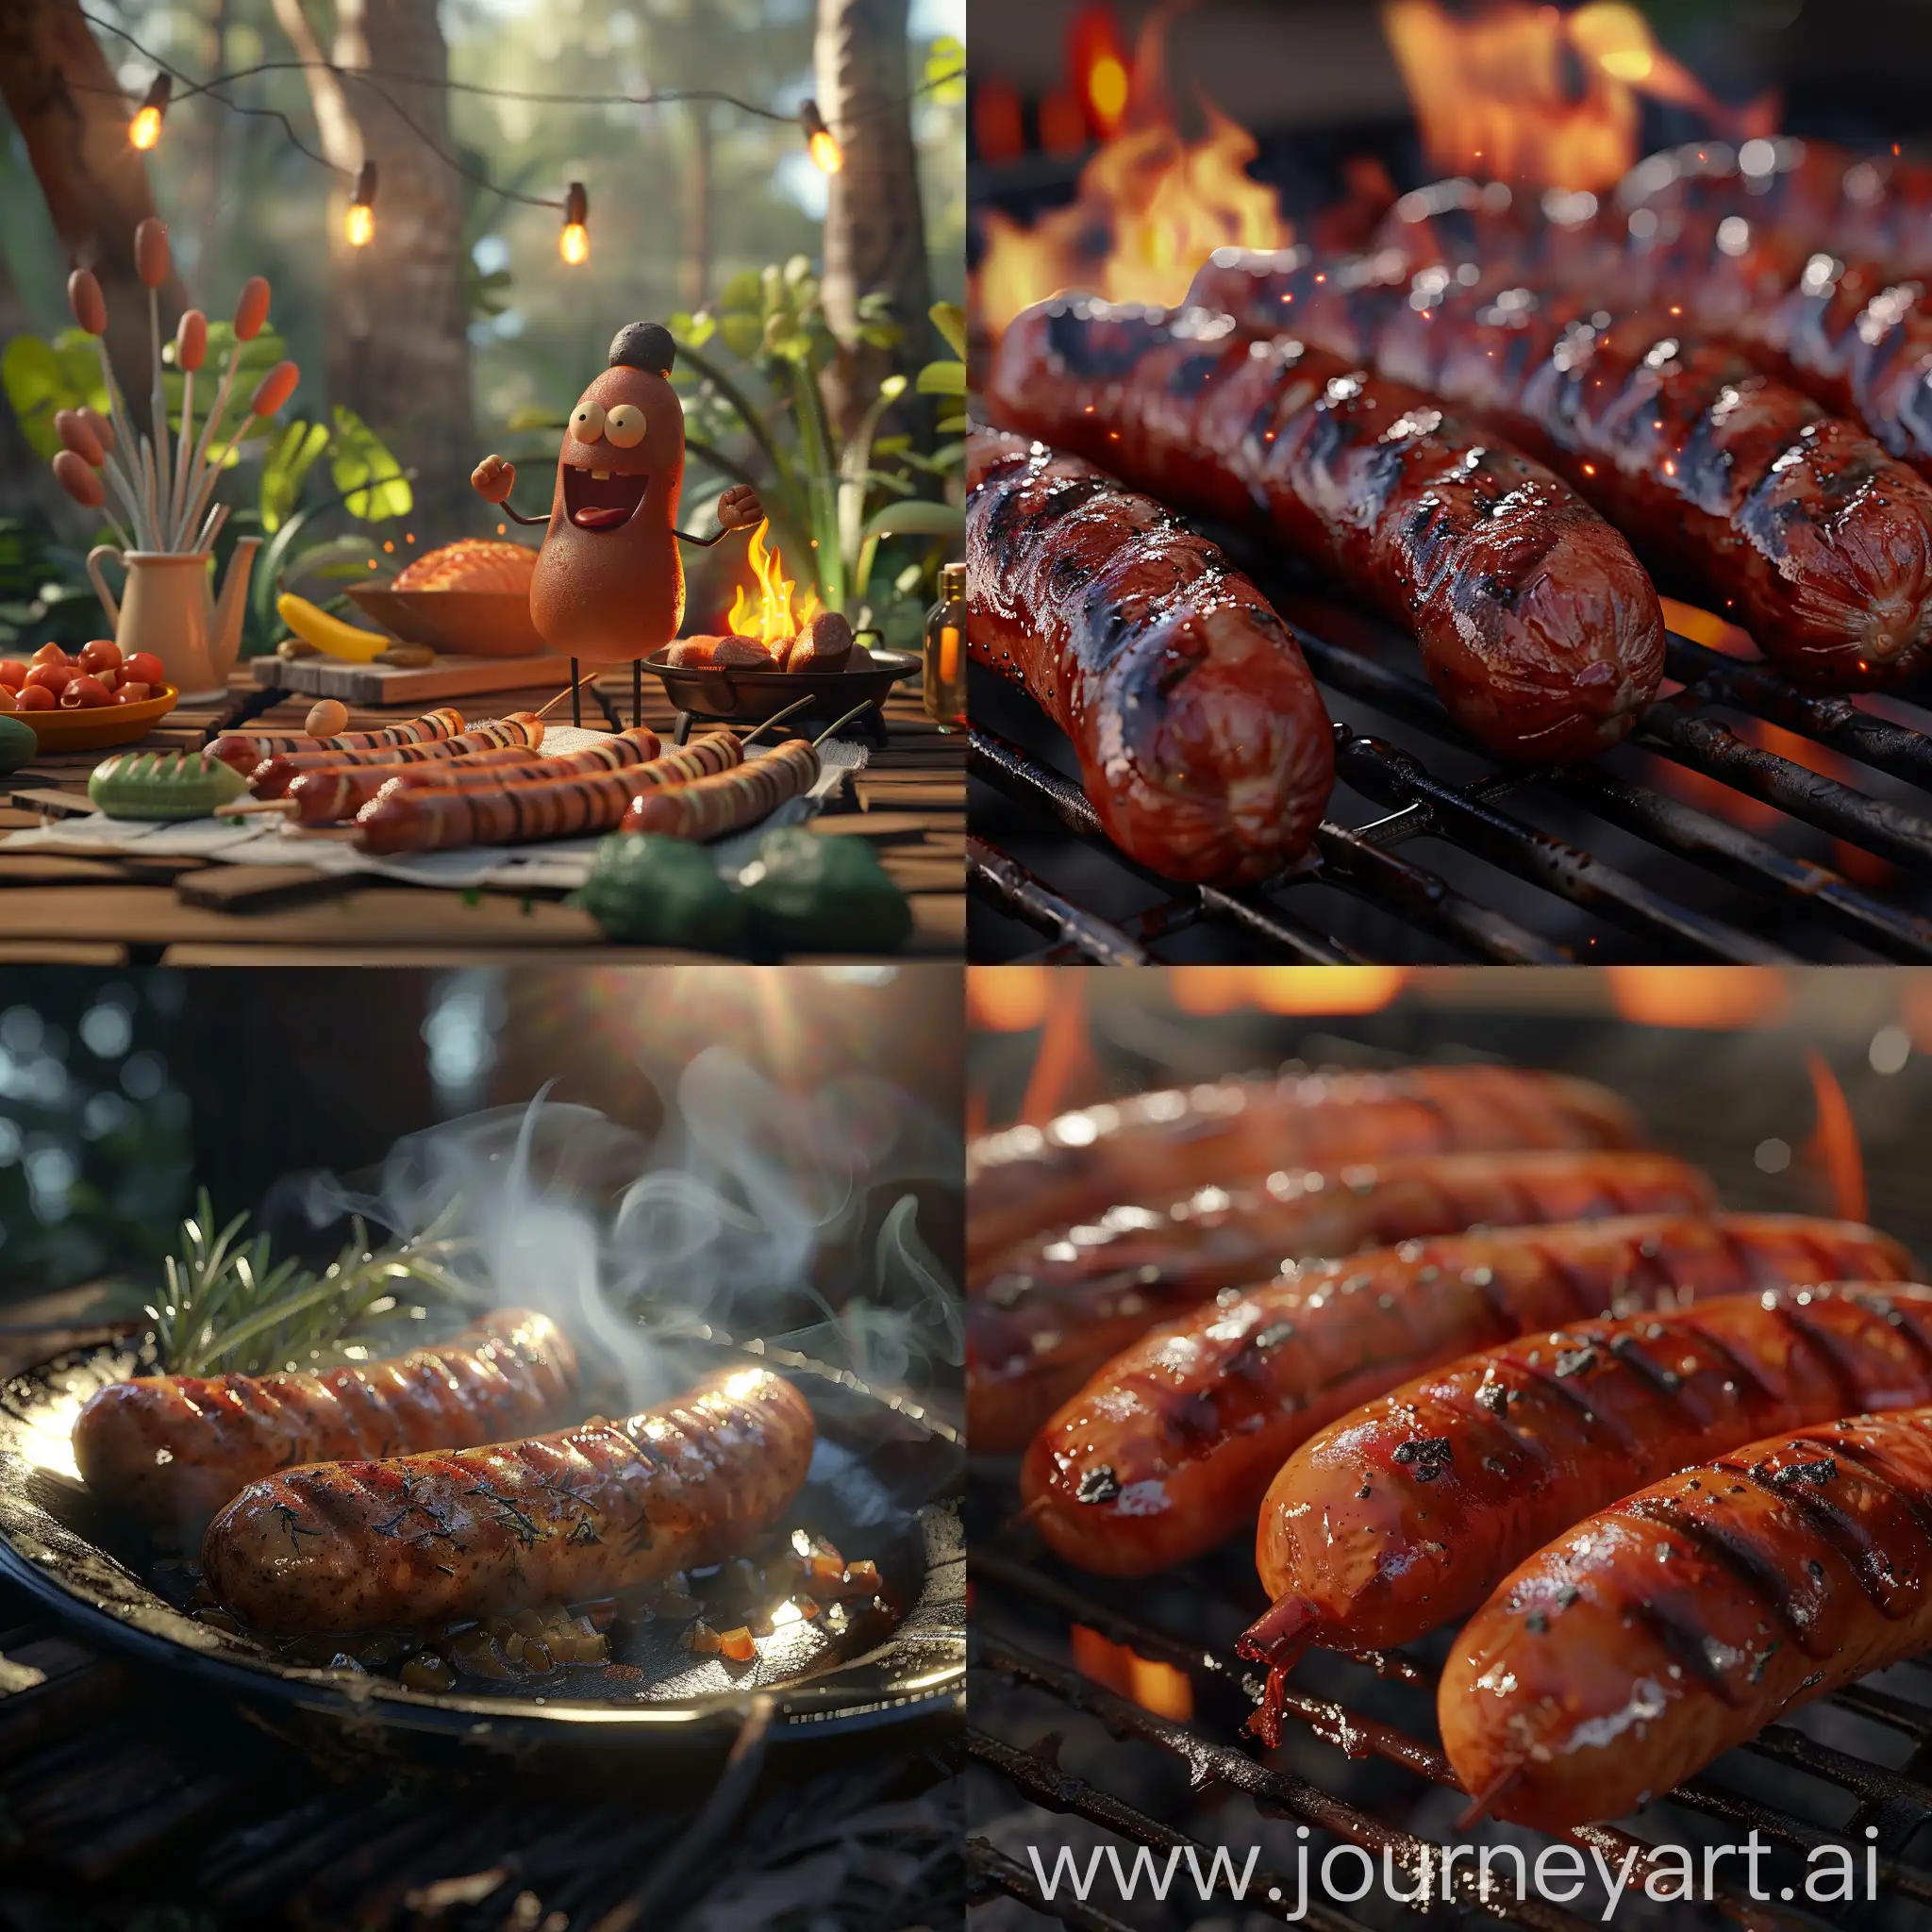 Sizzling-Grilled-Sausages-Mouthwatering-3D-Animation